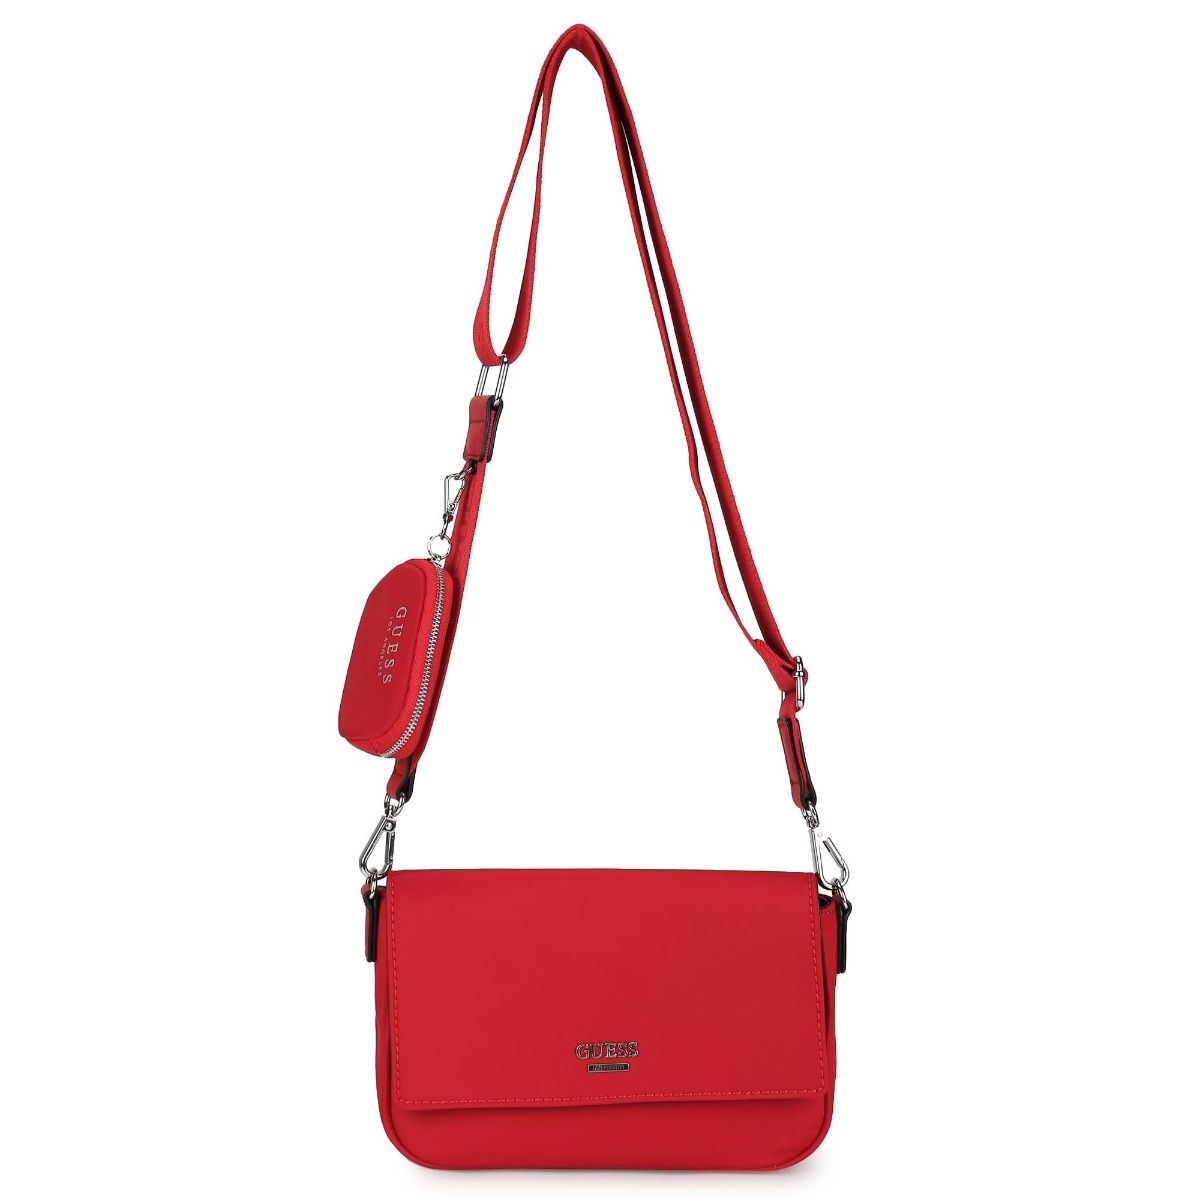 GUESS Red Bags & Handbags for Women